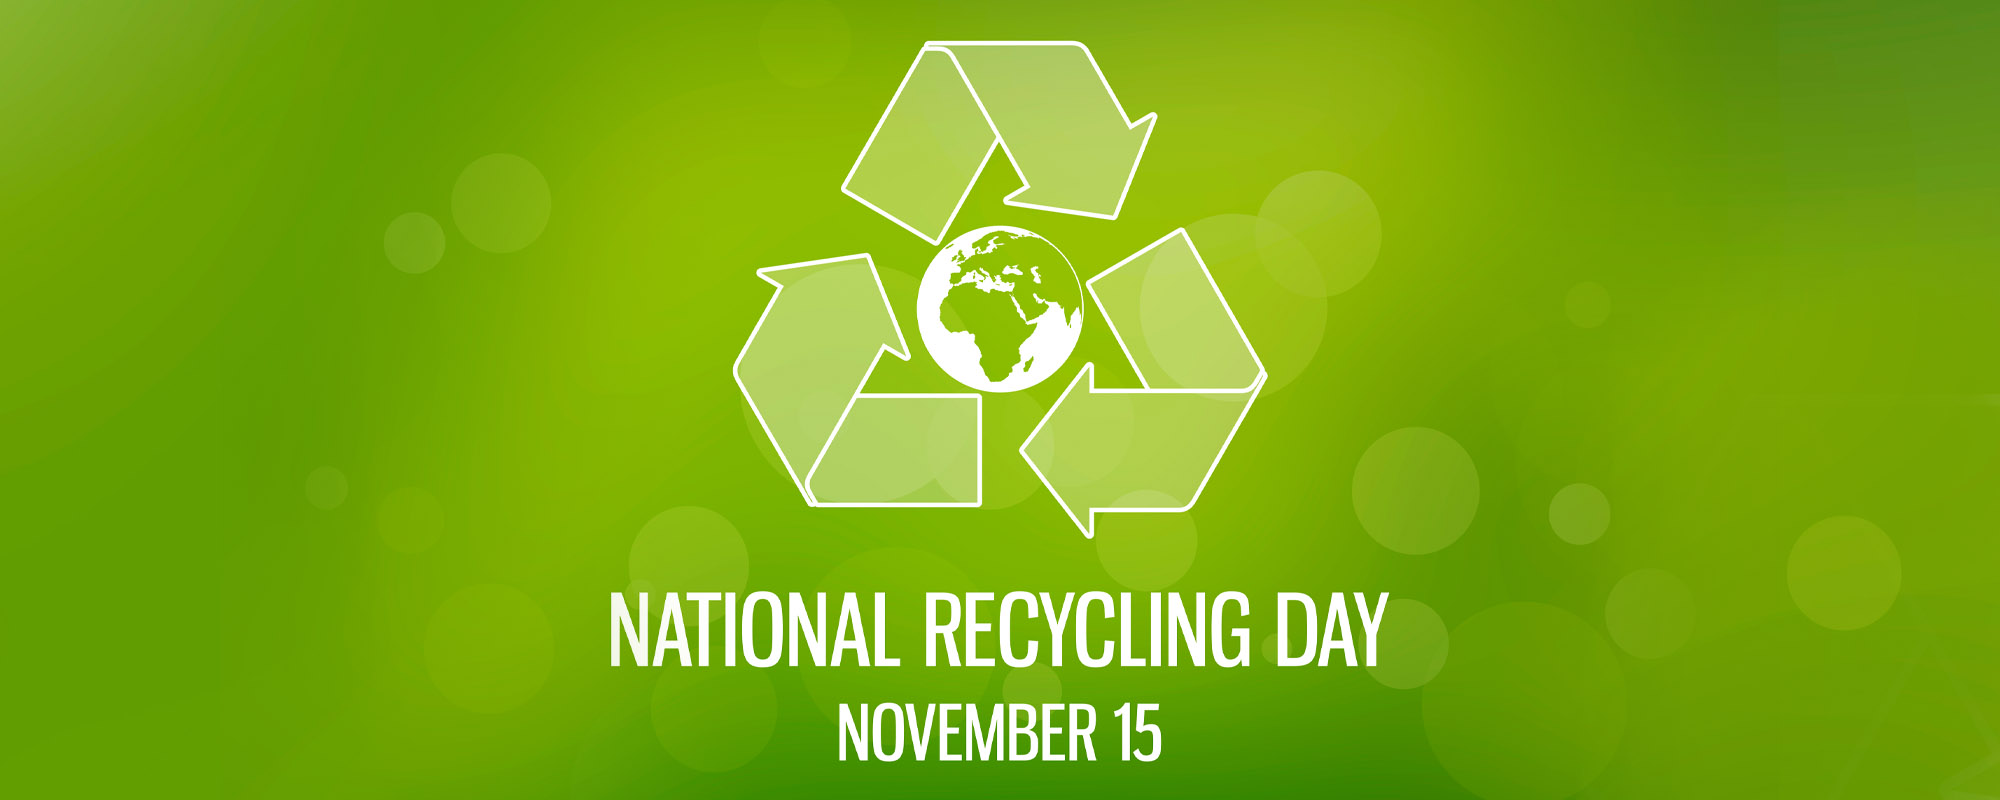 National Recycling Day 